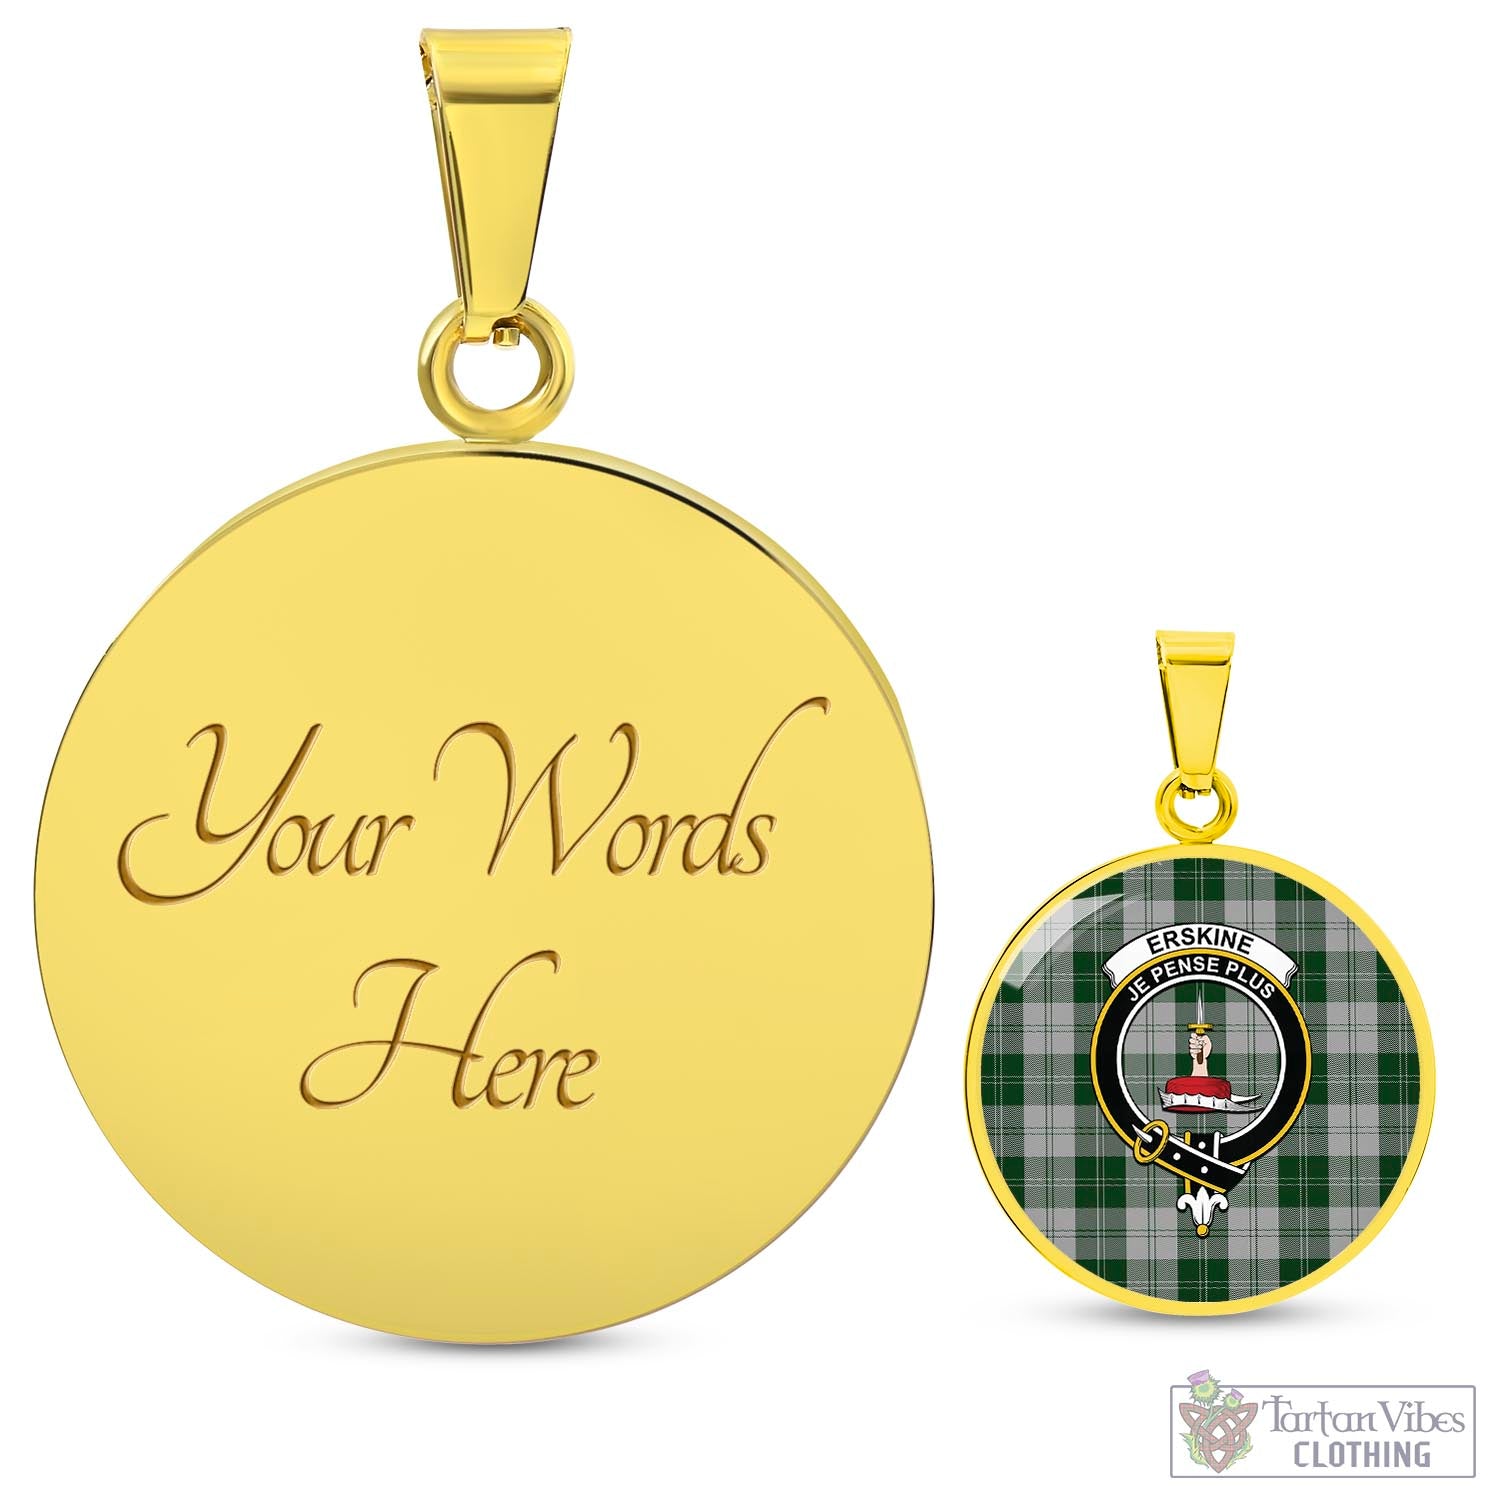 Tartan Vibes Clothing Erskine Green Tartan Circle Necklace with Family Crest